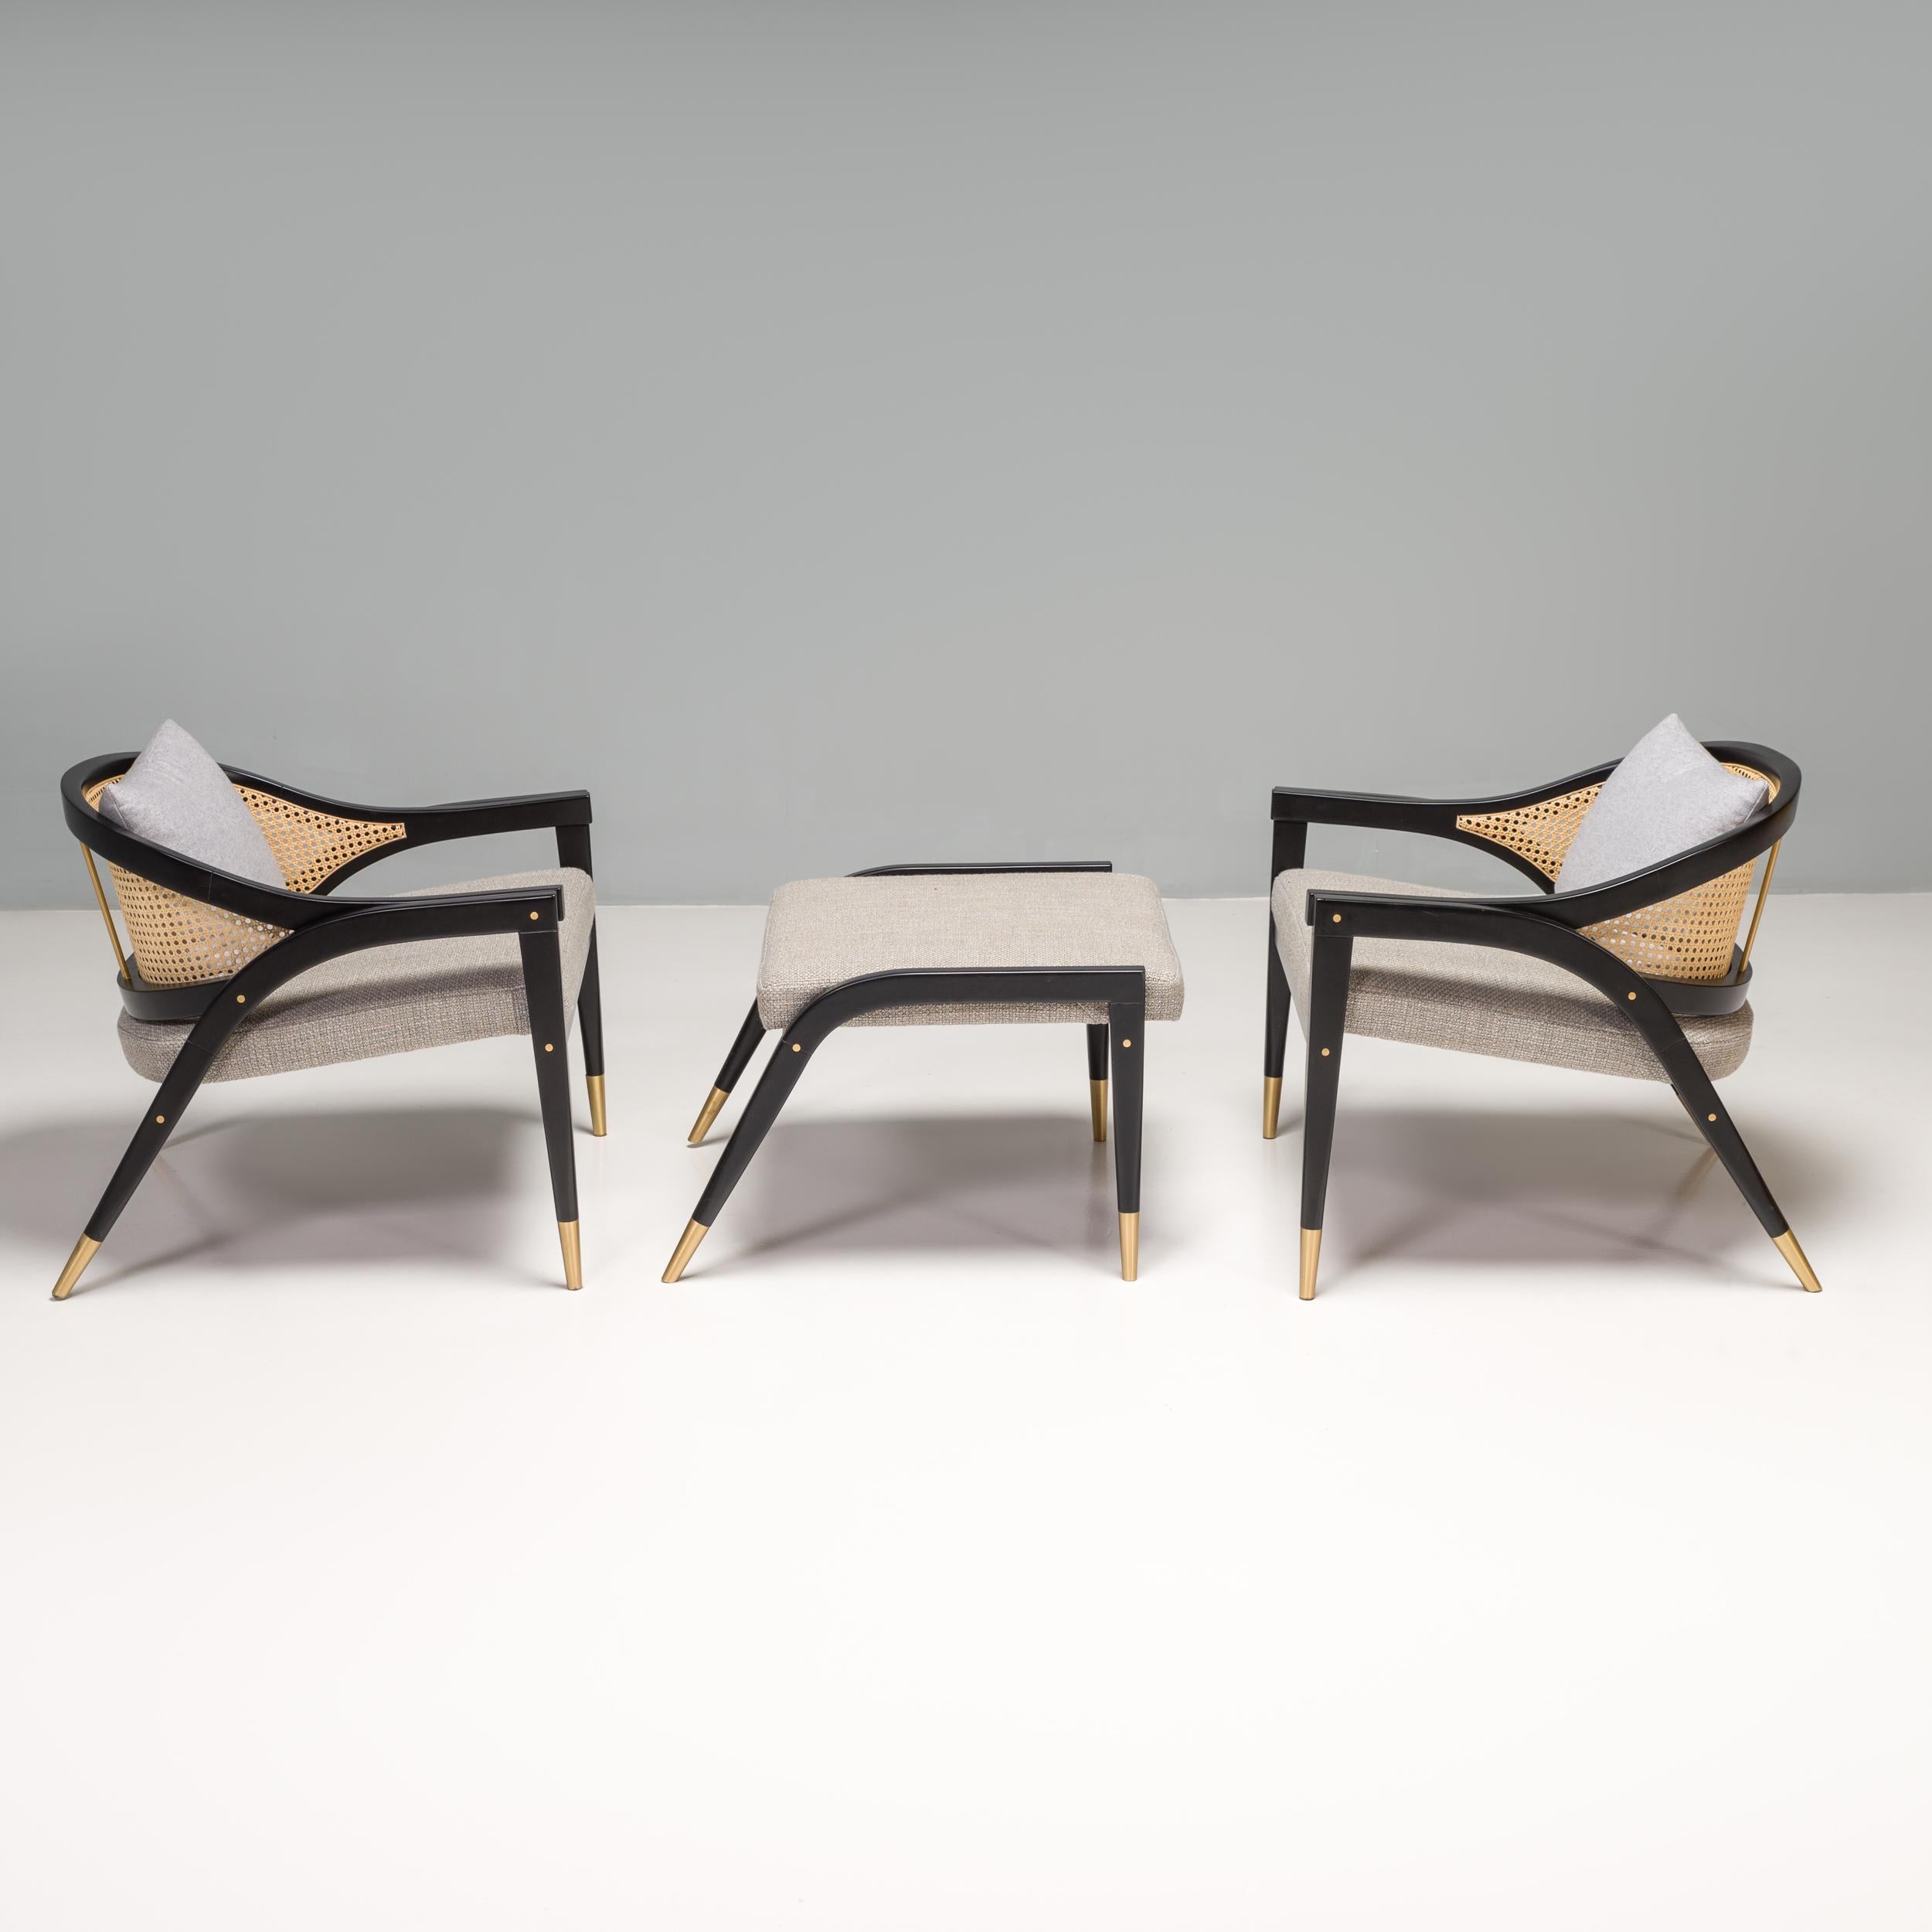 Designed by DUISTT and handcrafted in Portugal, the Wormley chair and footstool is inspired by the Edward Wormley Captain's chair from 1950s American modernism.

Constructed from a sycamore wood frame with a satin black finish, the chair features a